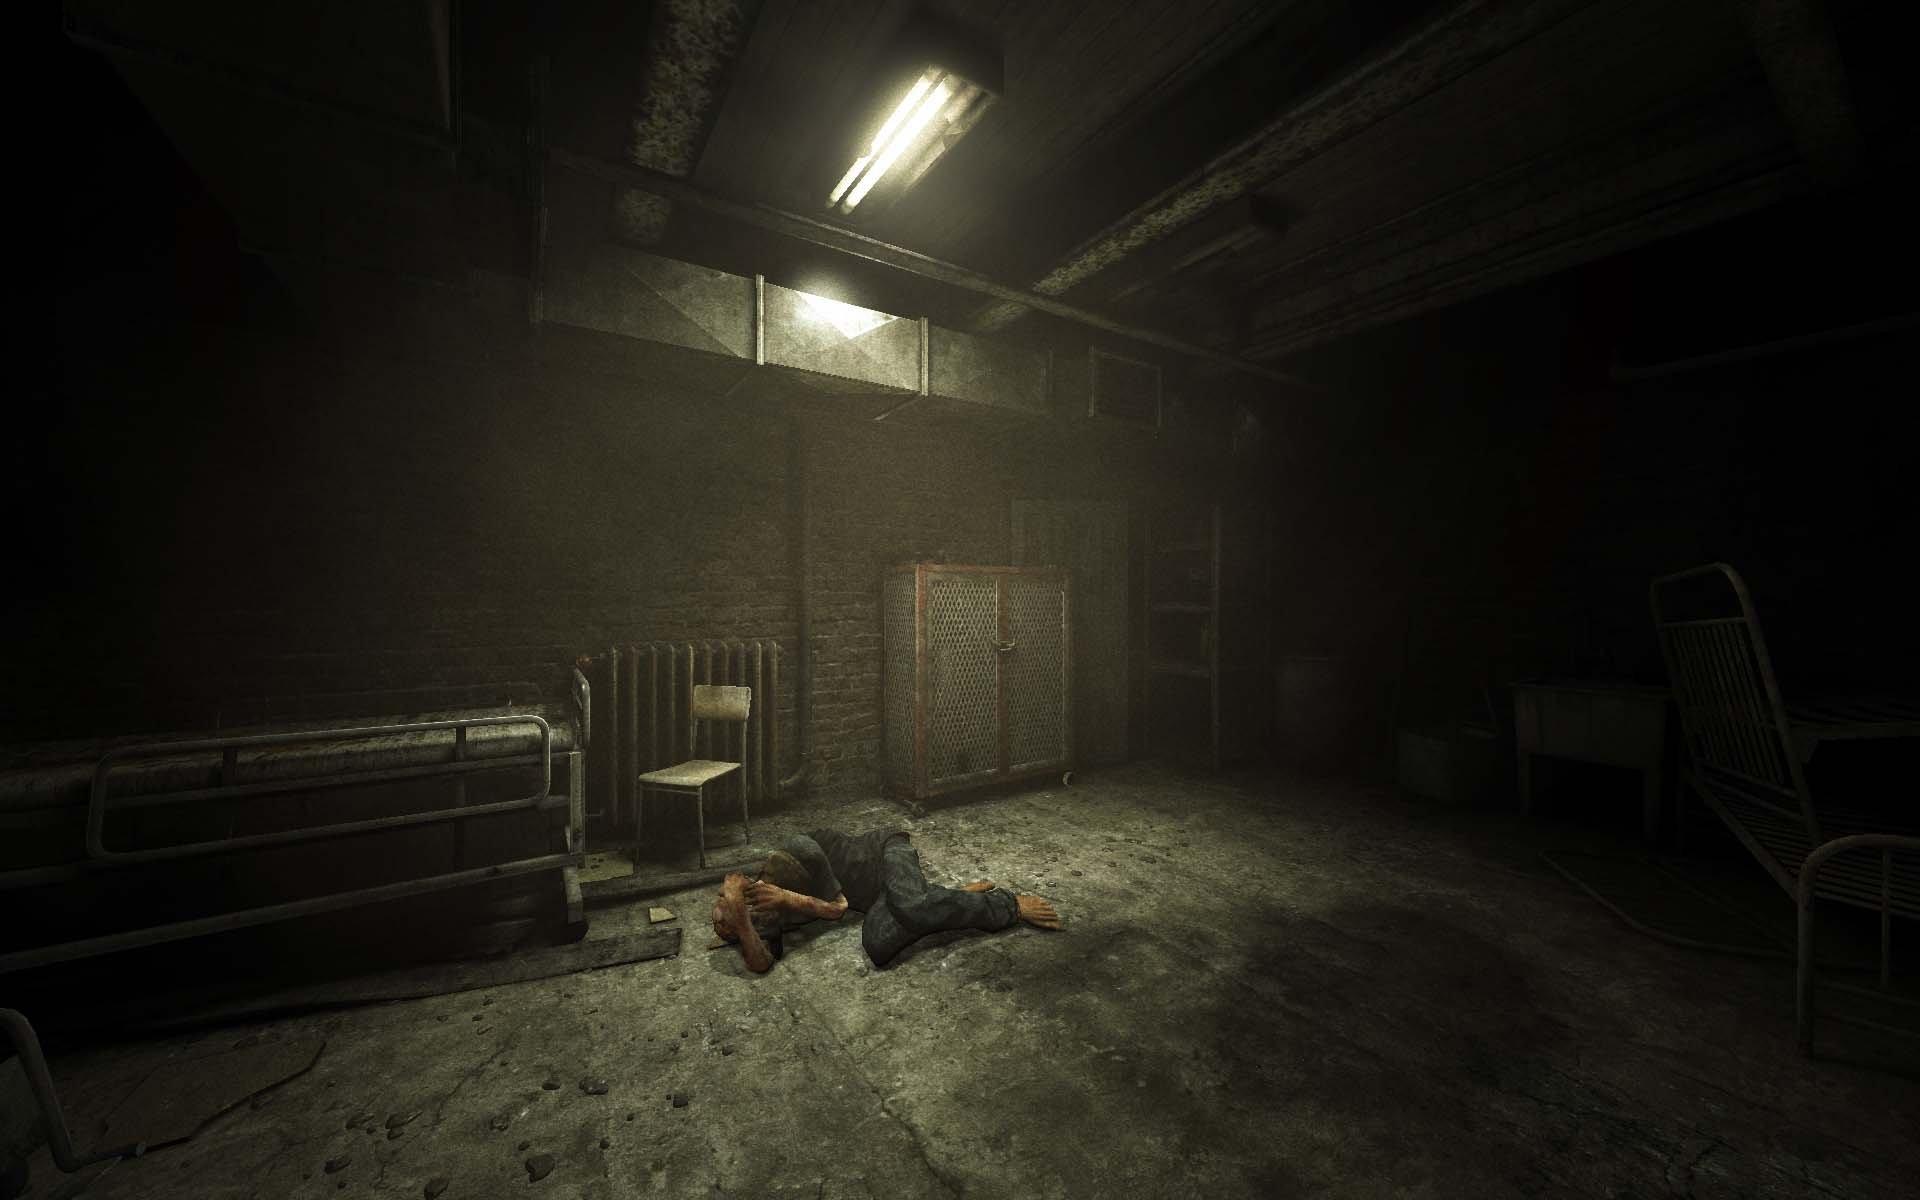 outlast video game